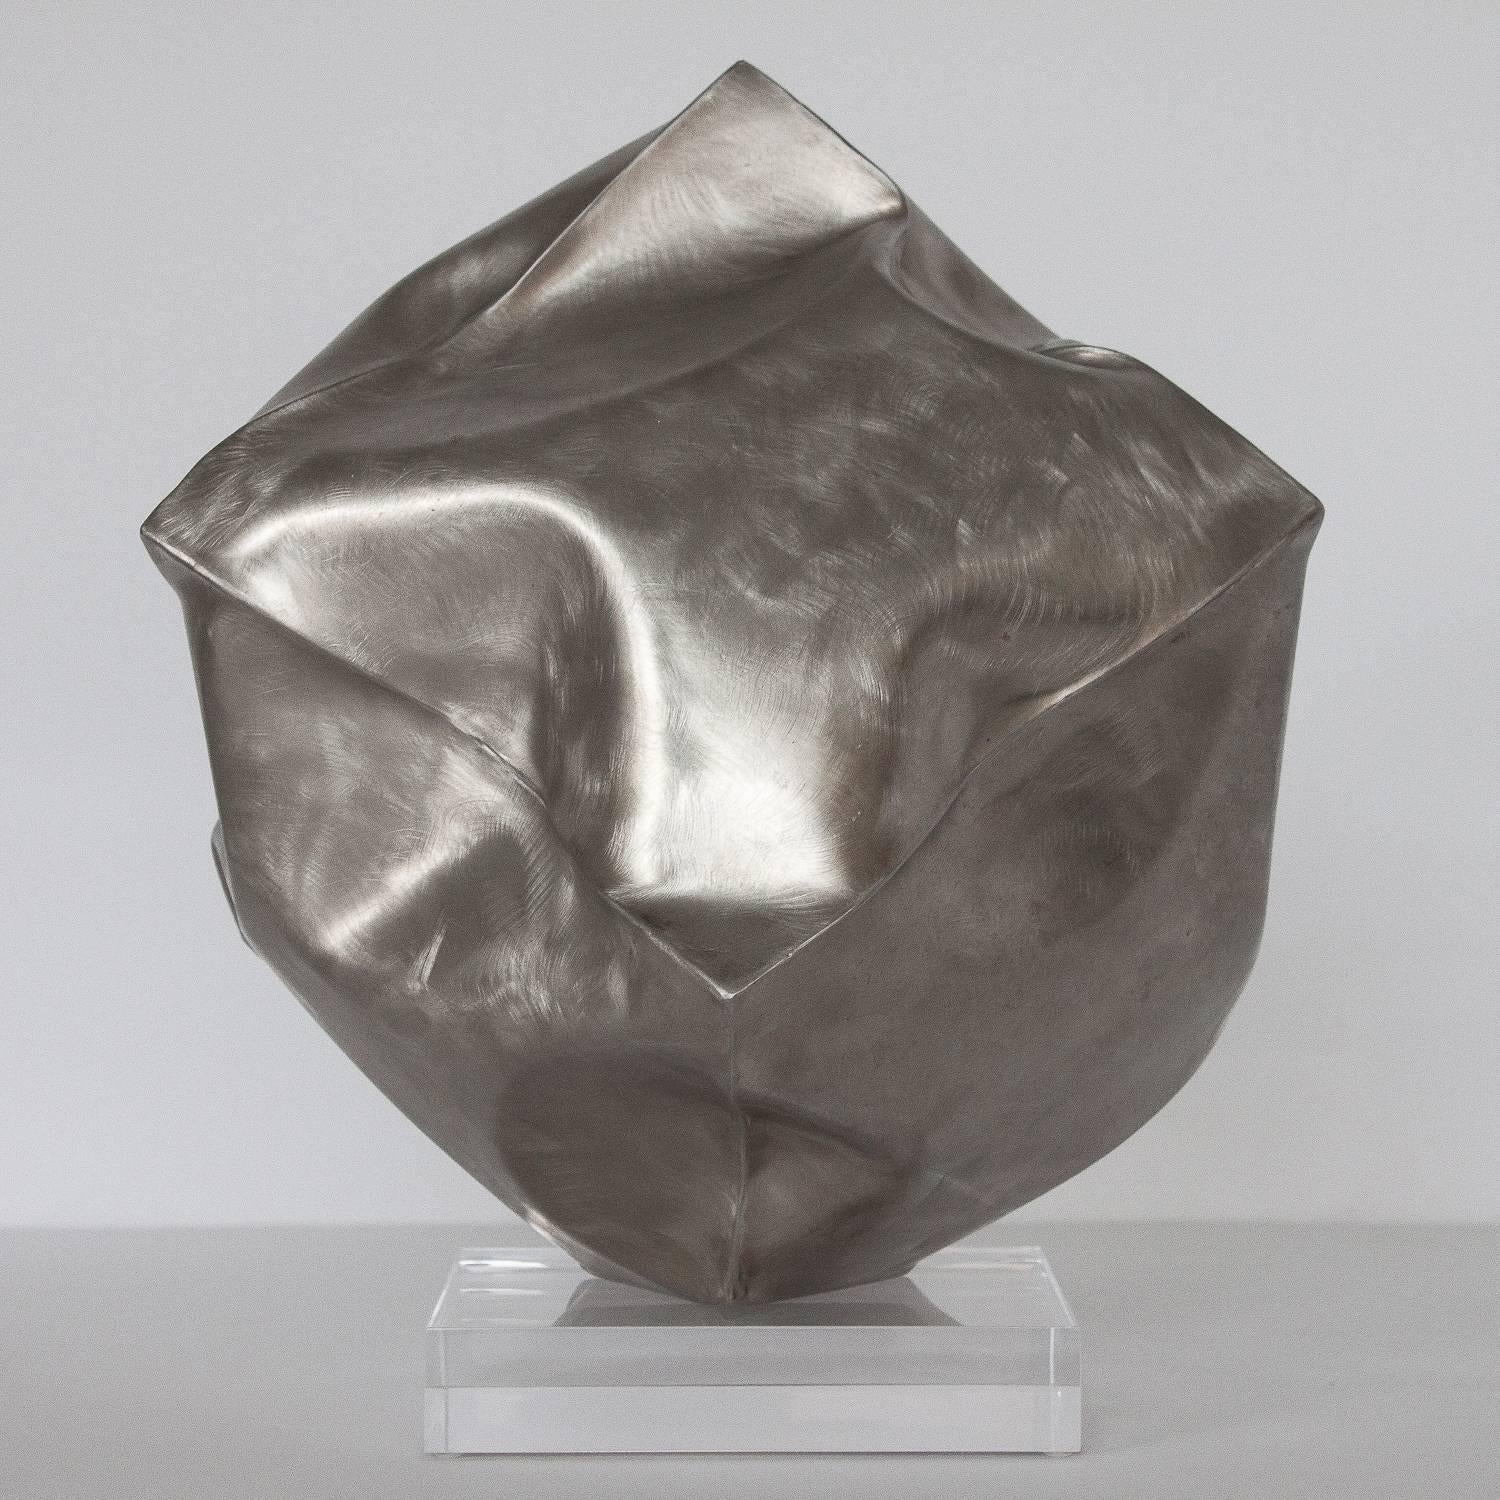 Abstract deflated / crumpled steel cube sculpture by Richard Baronio, circa 1973. Unusual form and striking form all angles. Signed and dated by the artist. Sculpture is resting on a 6